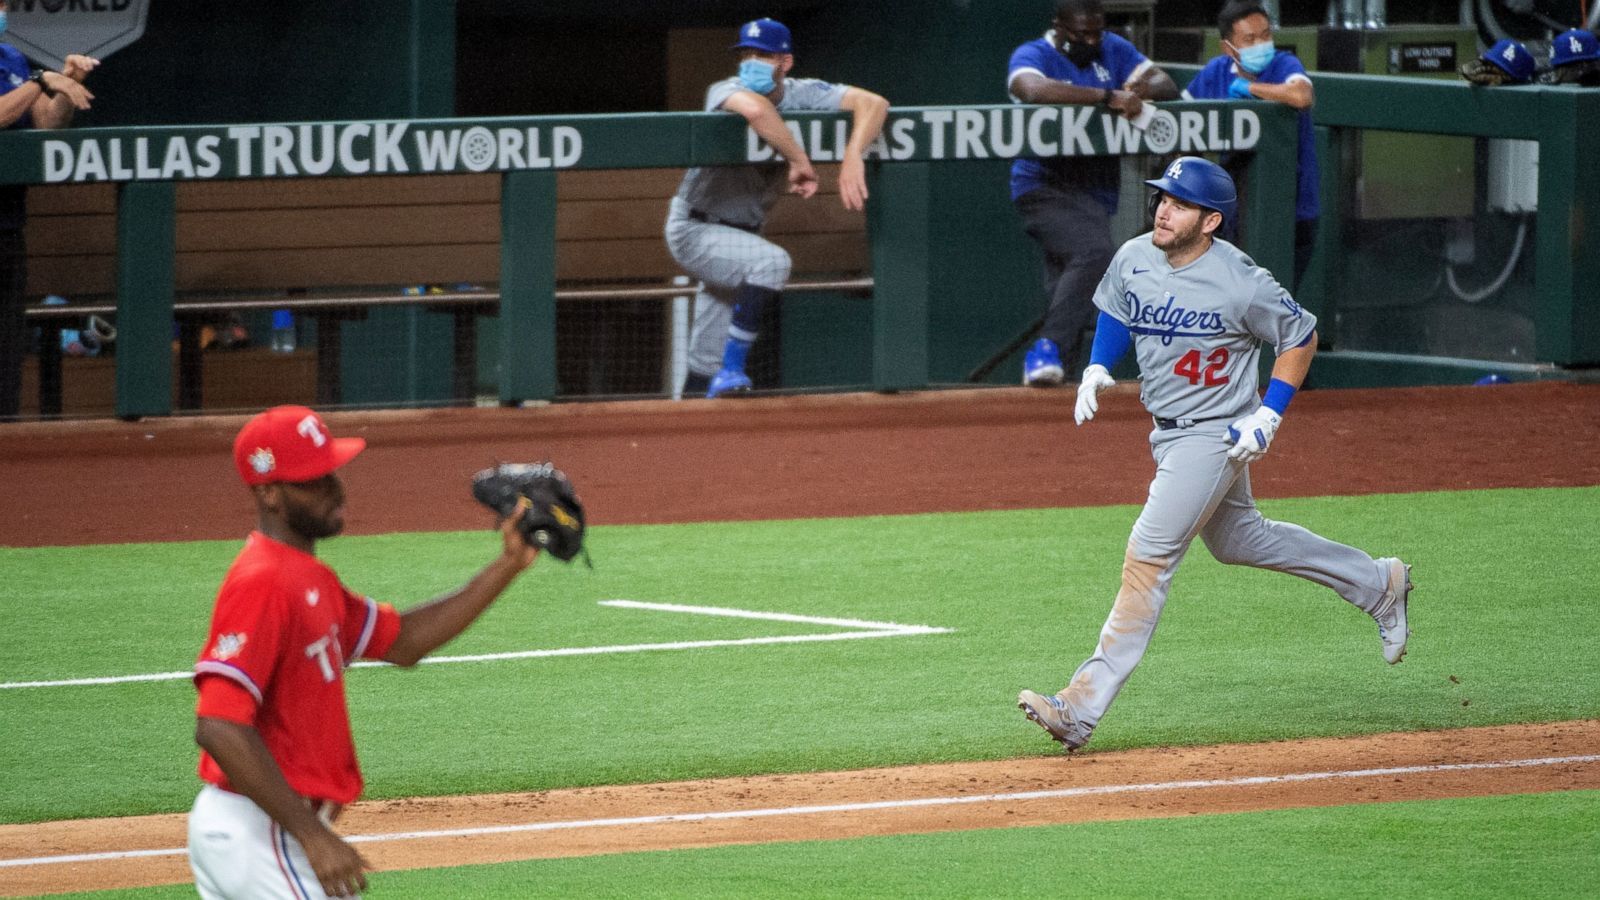 Muncy 4 RBIs For Dodgers In 7 4 Win Over Rangers And Lynn